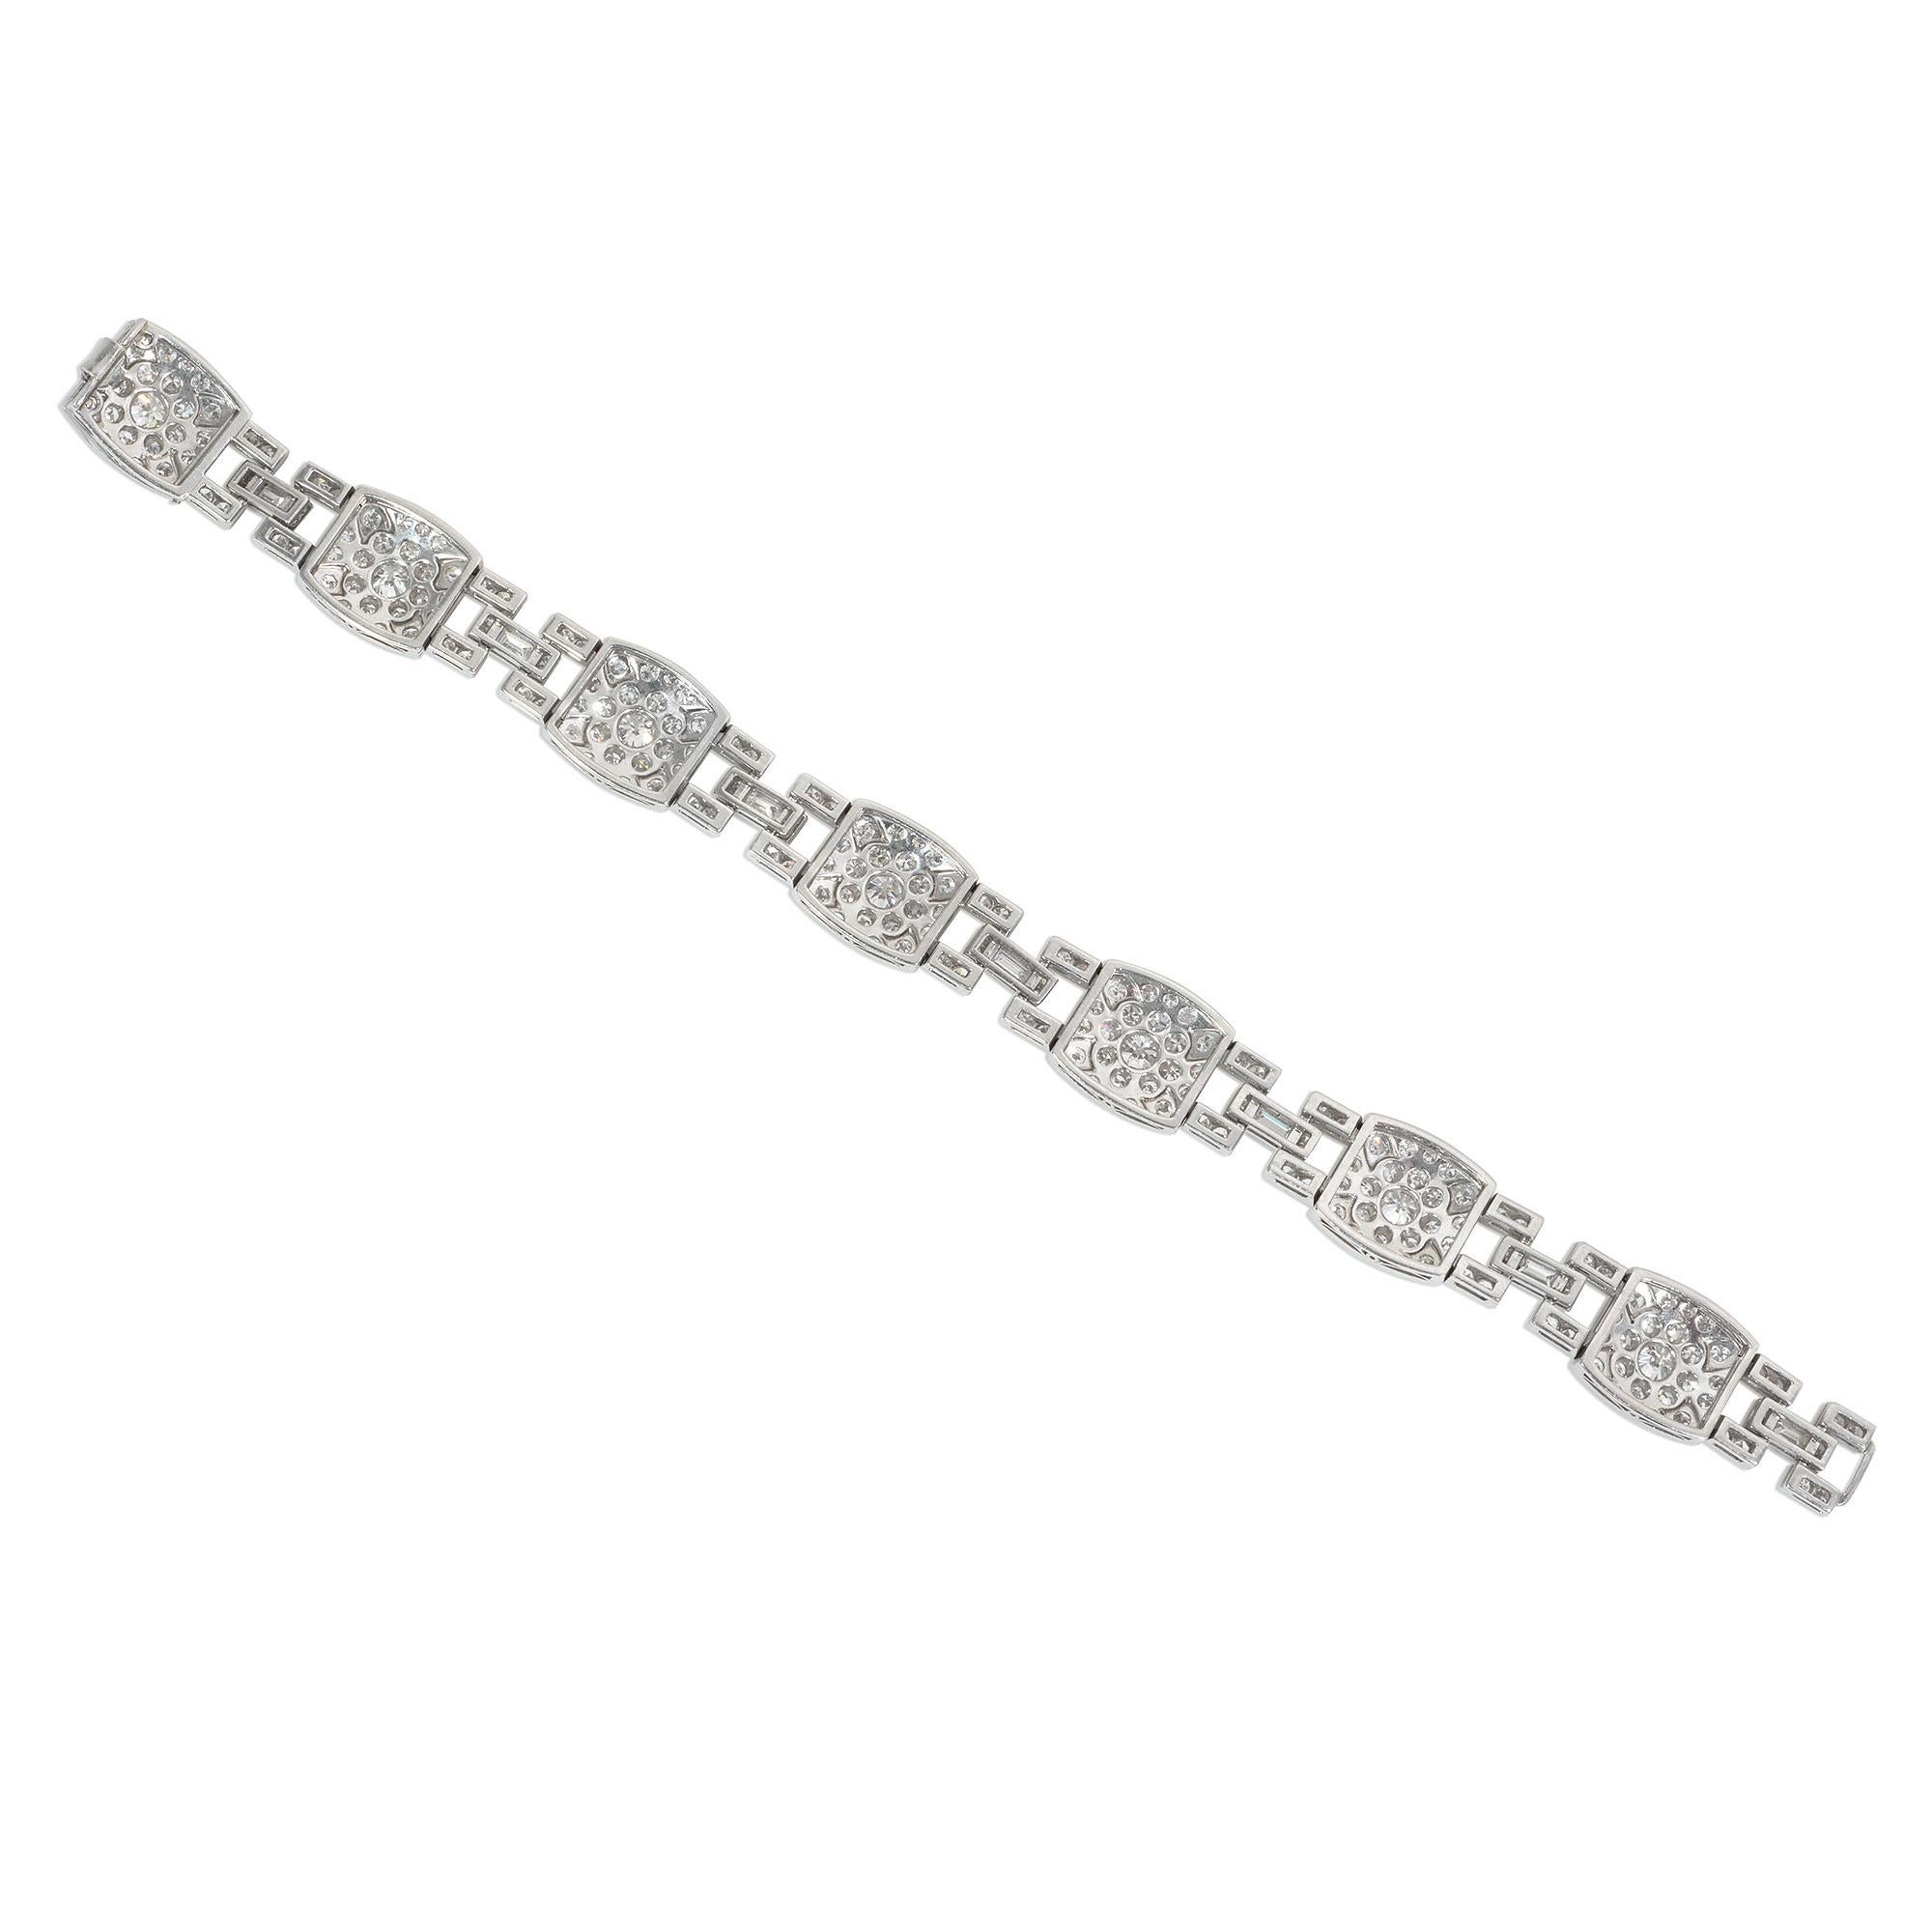 An Art Deco diamond and platinum plaque bracelet featuring rounded rectangular pavé diamond panels with stylized diamond flowers, joined by rectangular links centered by baguette-cut diamonds, in platinum.  Atw 6.67 cts.

* Includes letter of